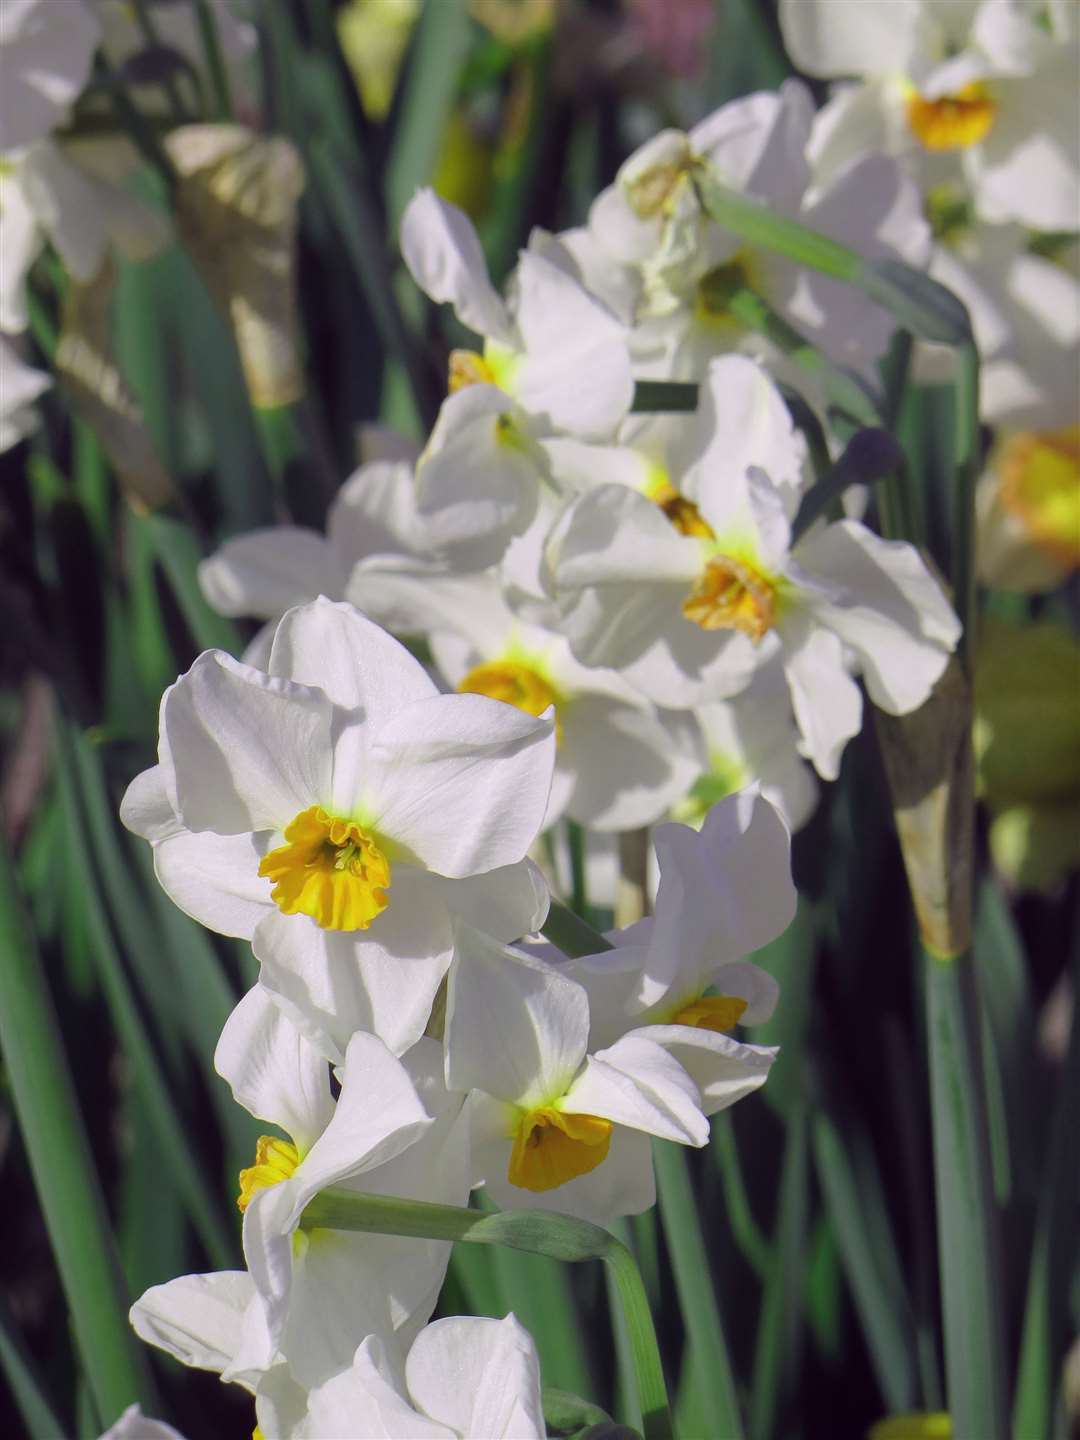 Narcissus 'Laurens Koster' from Peter Nyssen. Picture: Karen Lynes/ PA